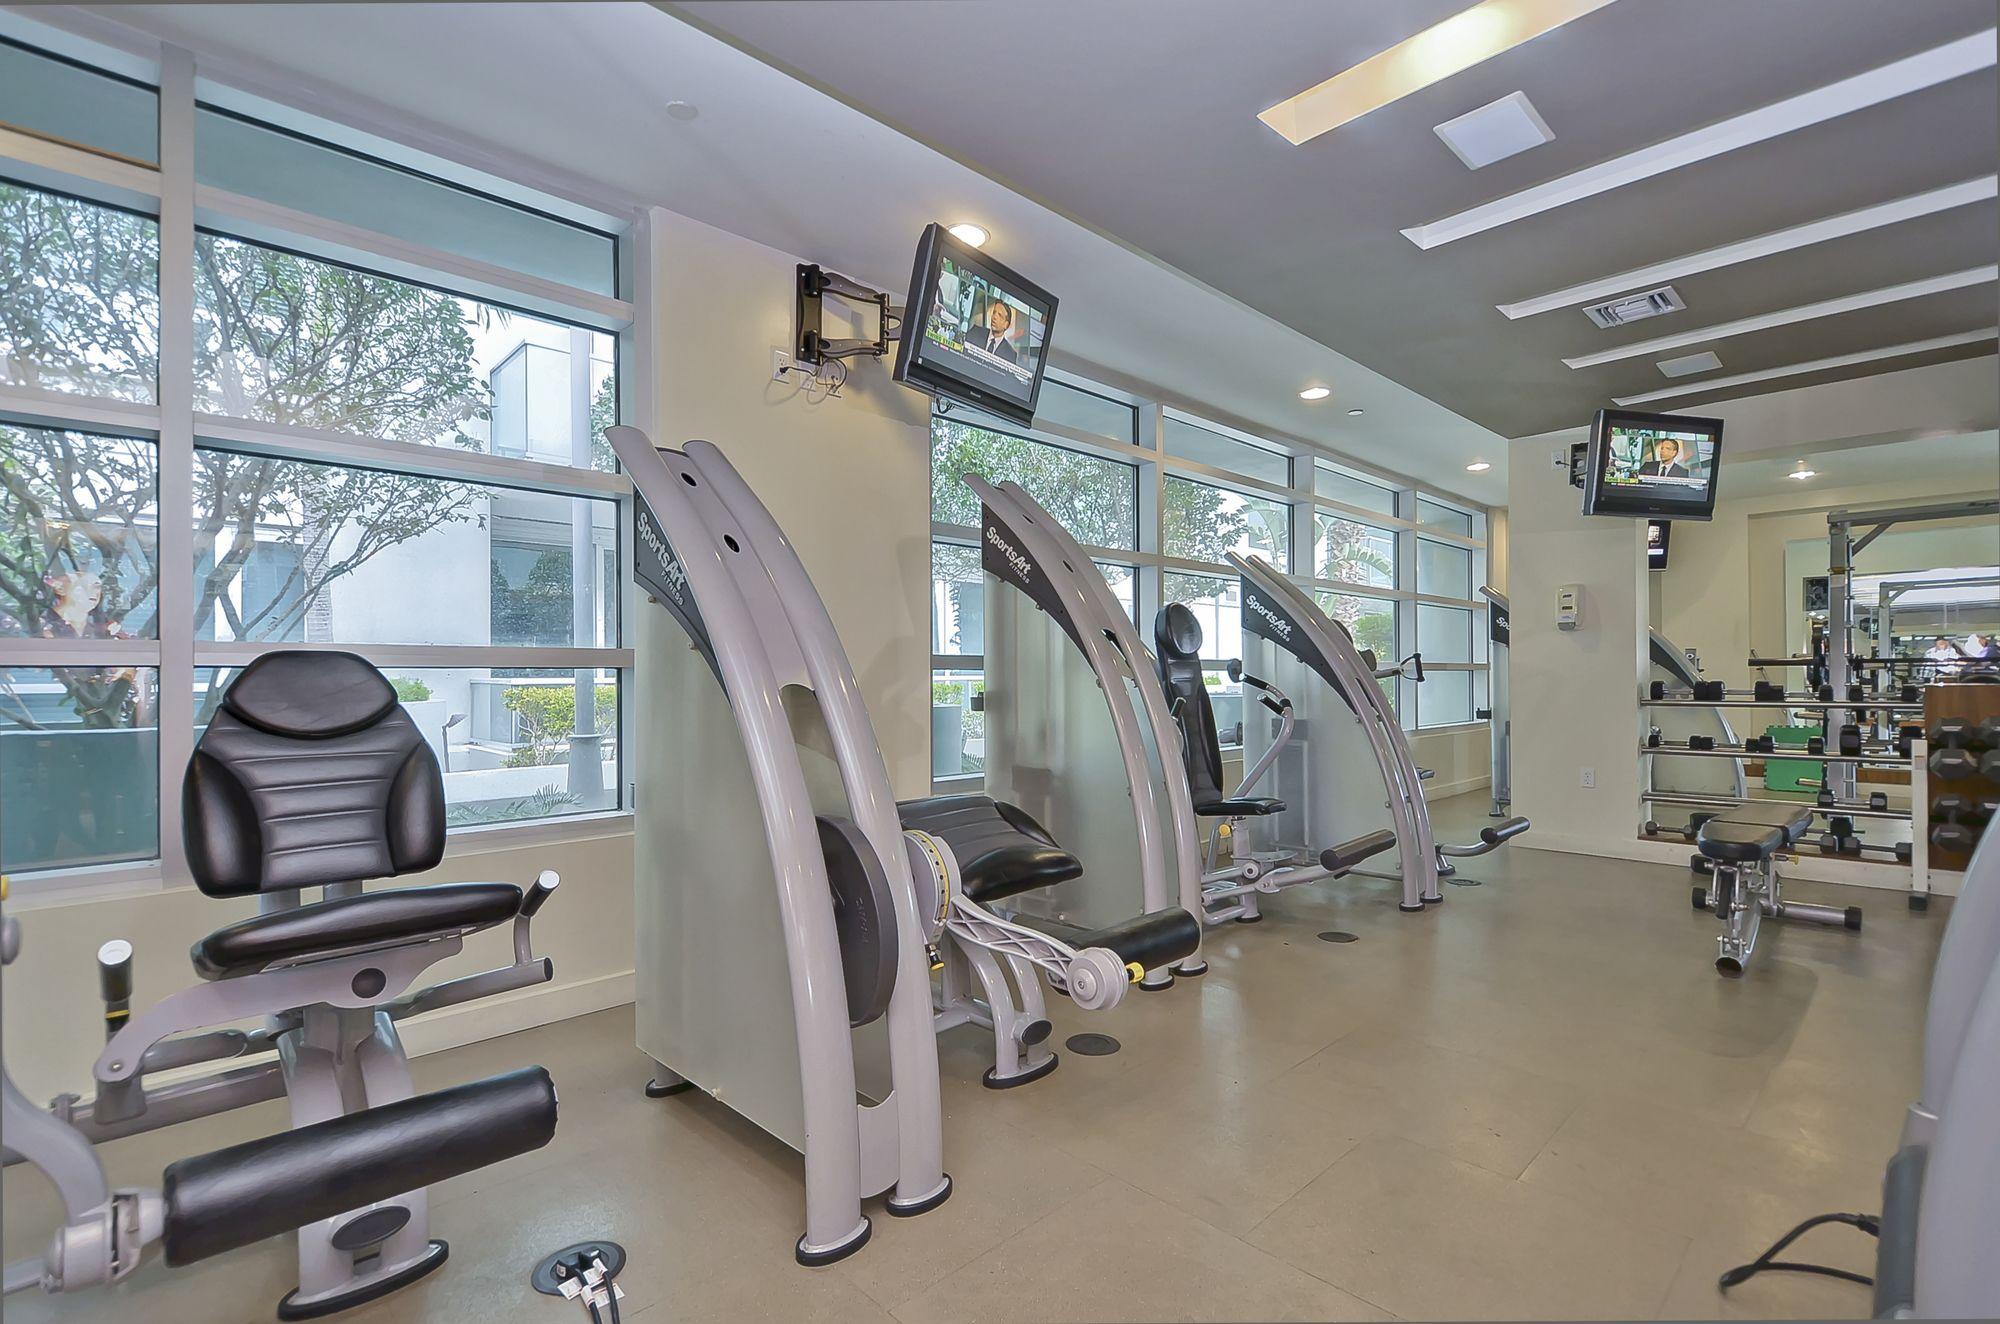 Health club NEW Two bedroom condo in Channelside Tam